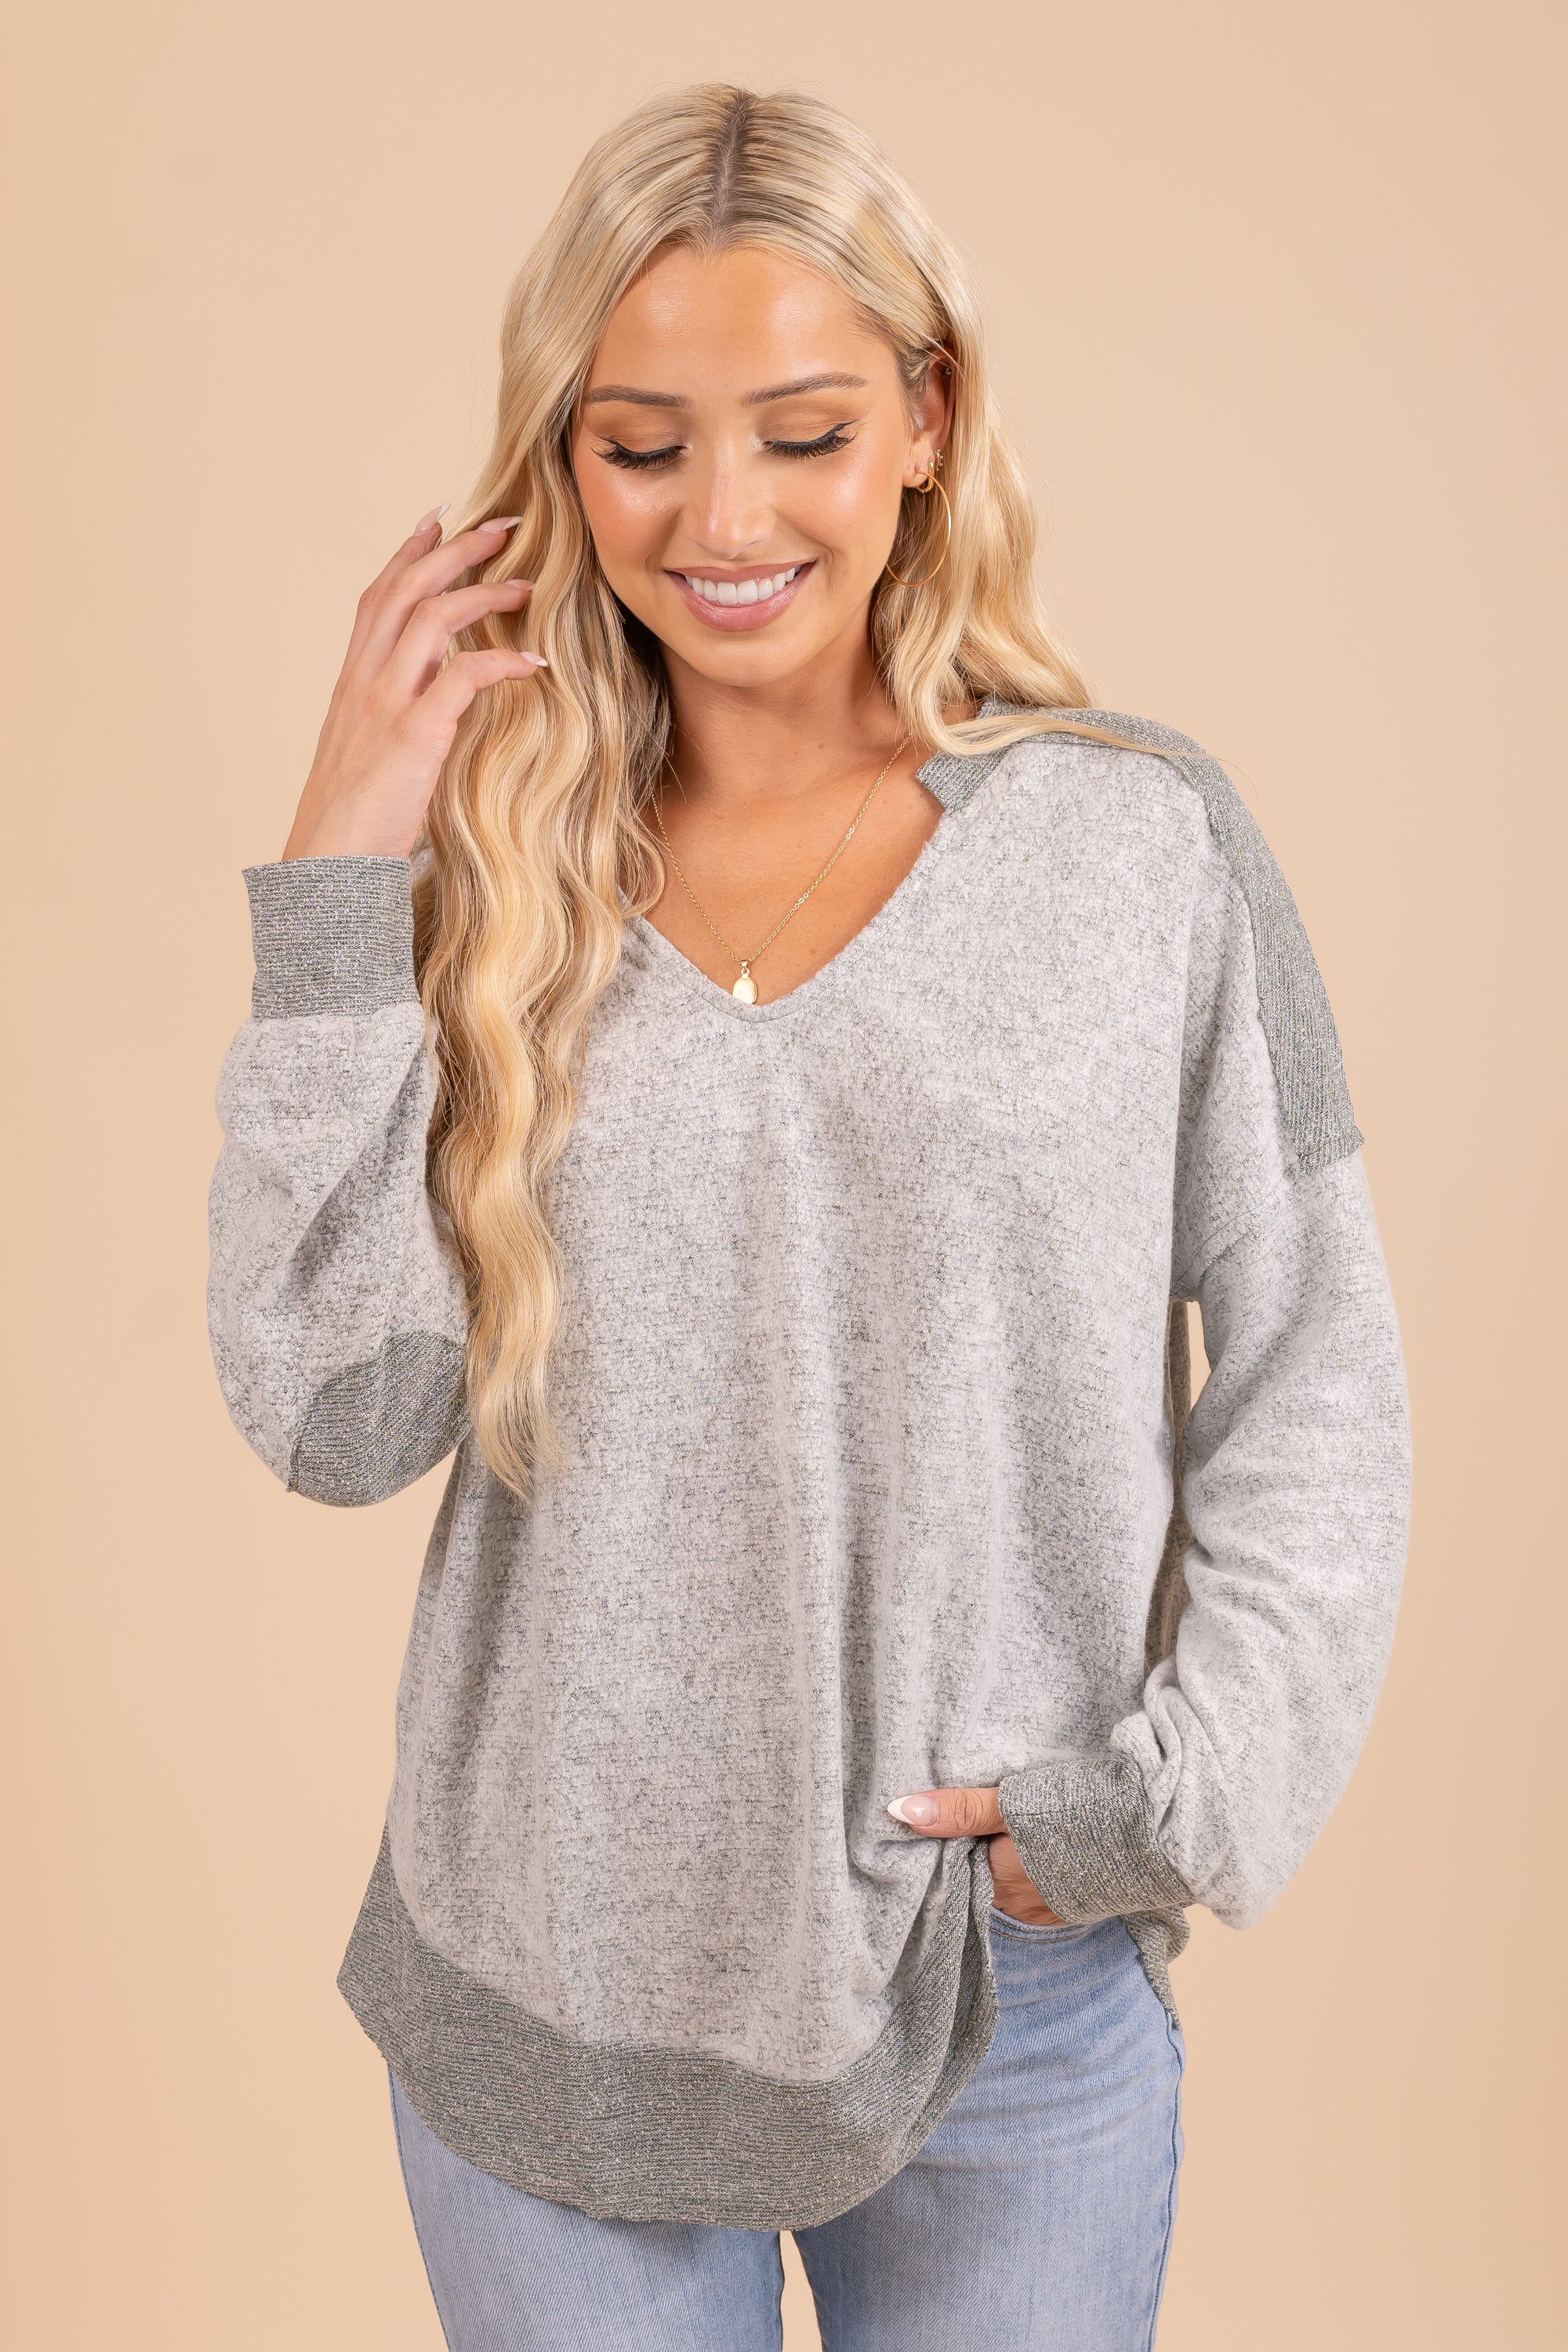 New Lunya Cozy cotton silk pullover restful grey heather sweater Size L